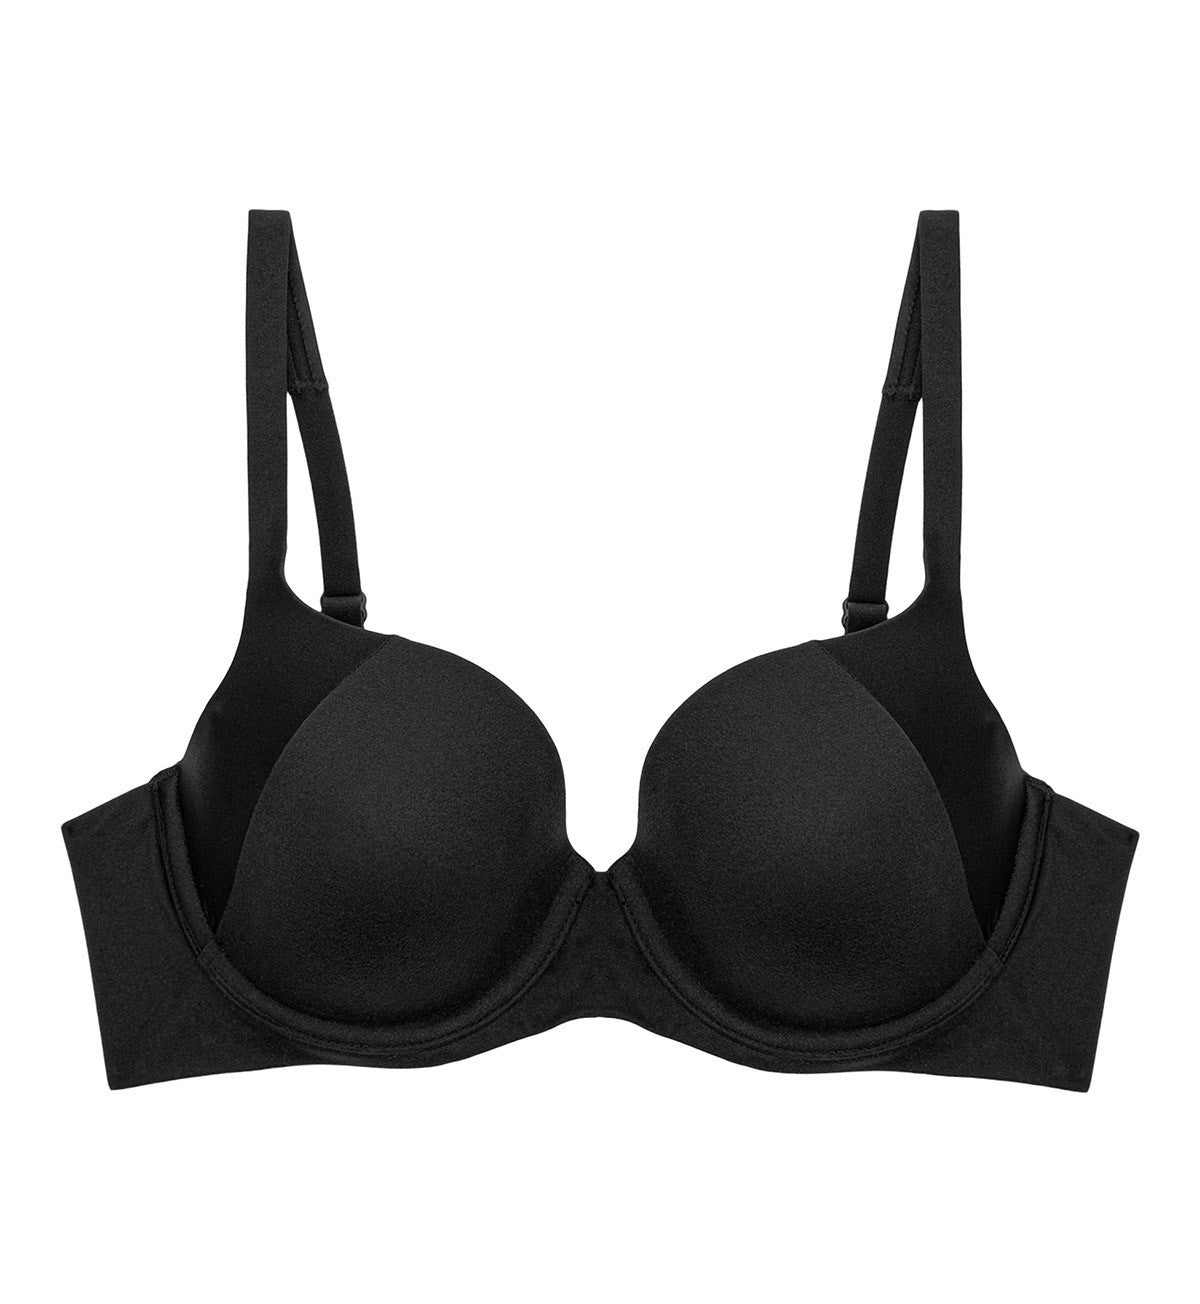 Buy Black/White/Nude DD+ Pad Full Cup Smoothing T-Shirt Bras 3